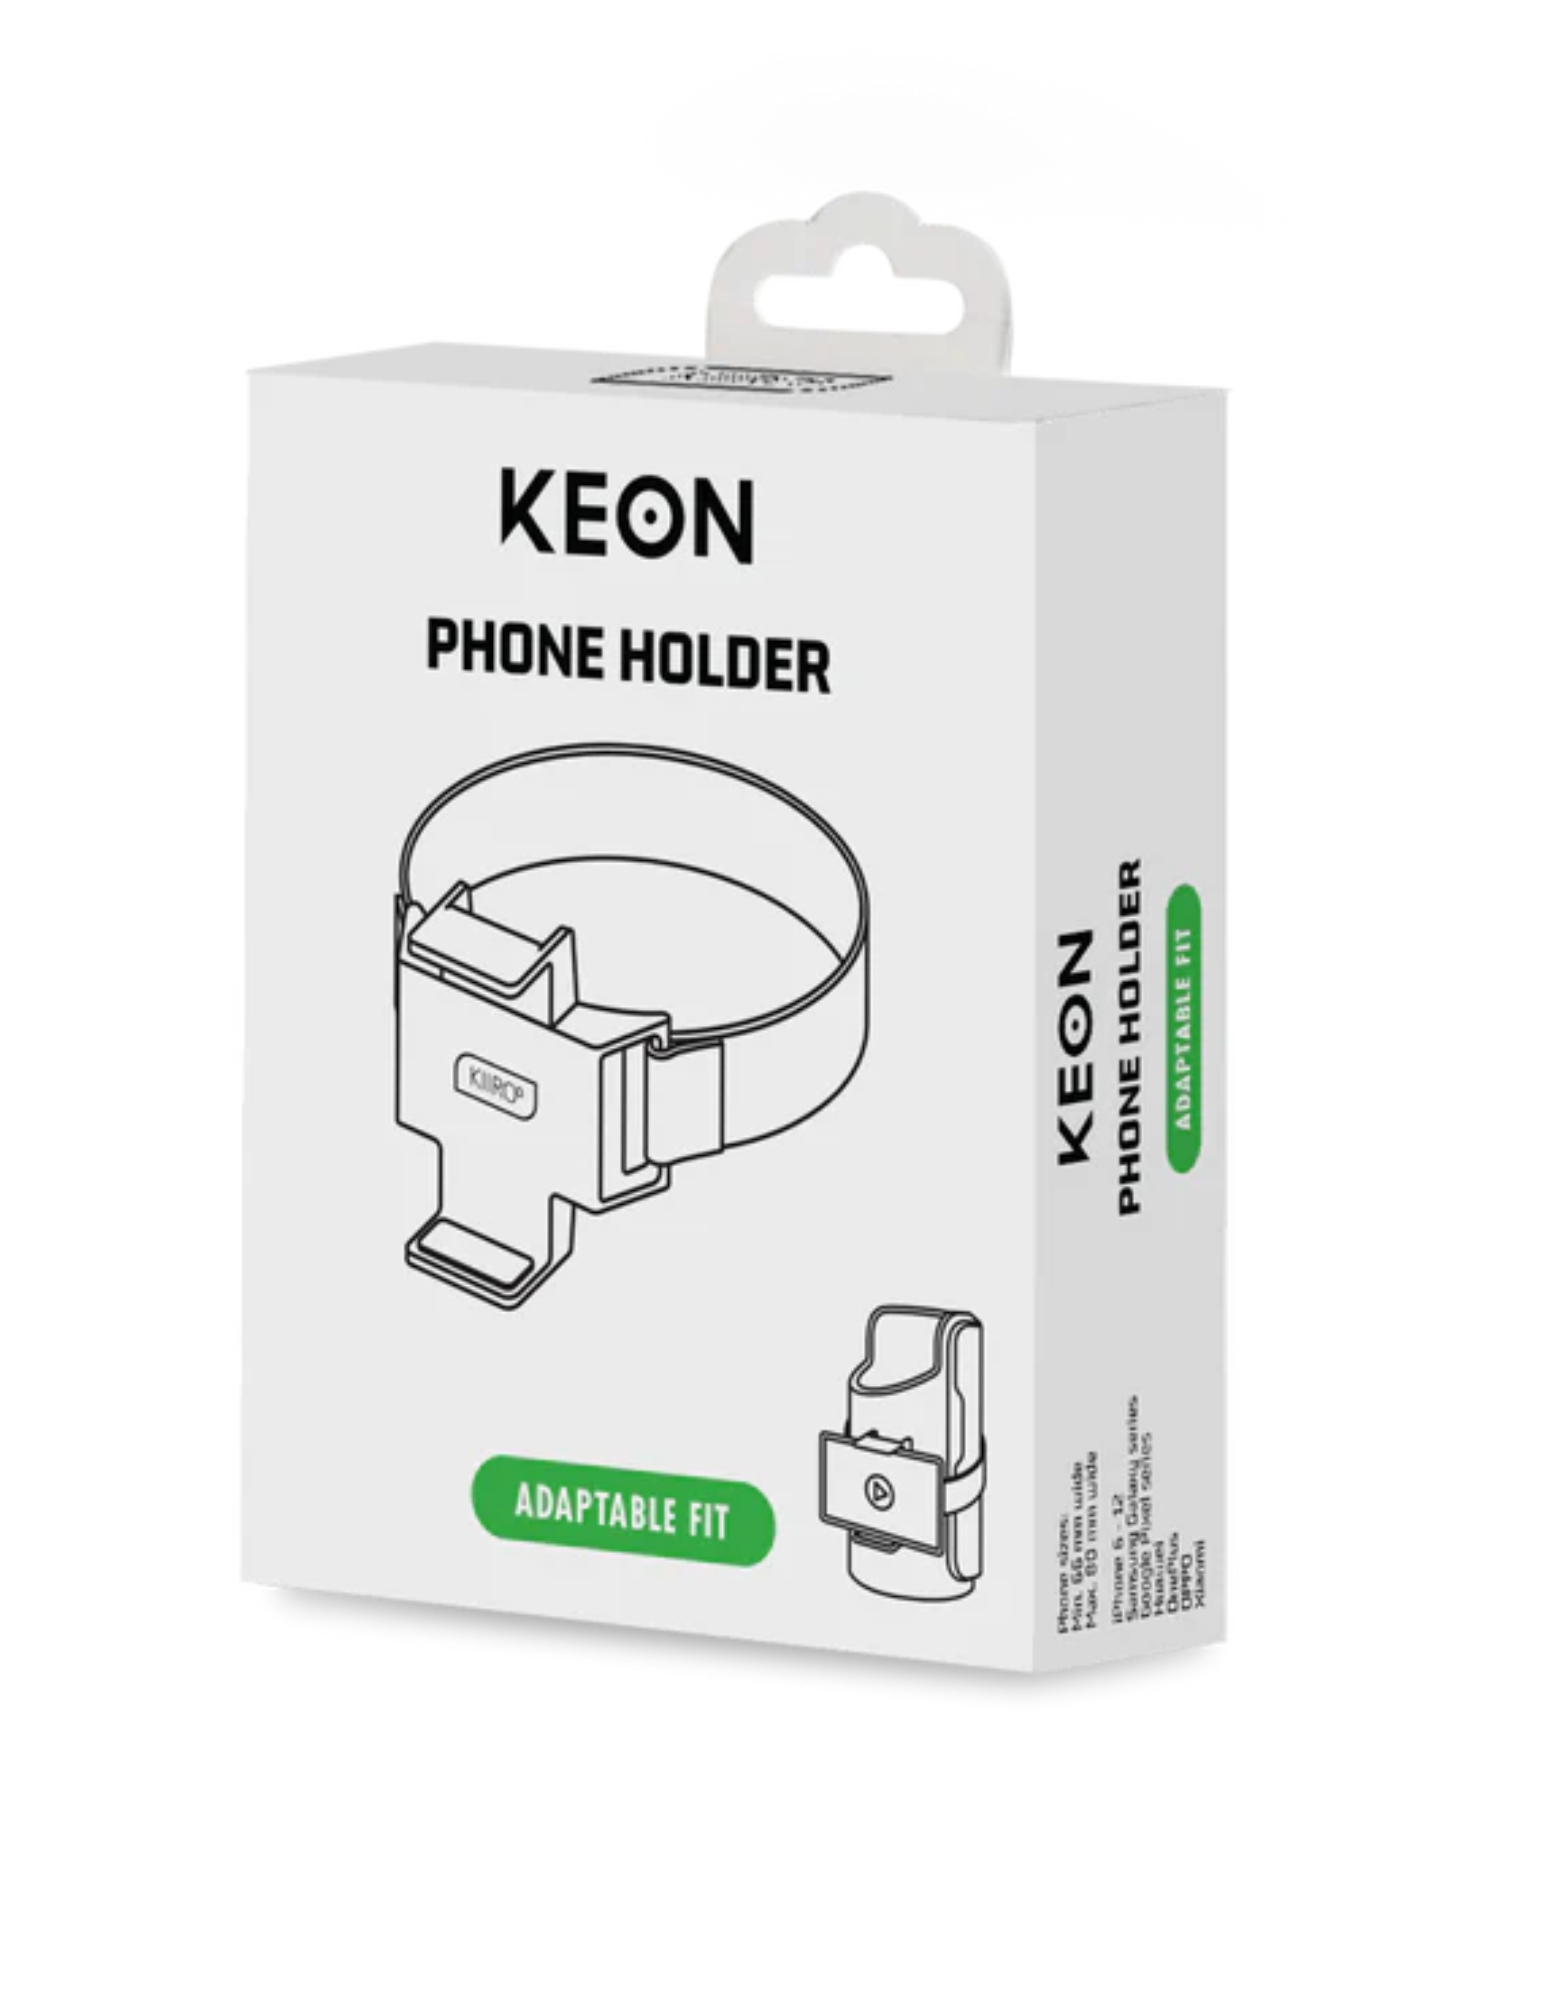 Photo of the front of the box for the Keon Accessory Phone Holder by KiiRoo.